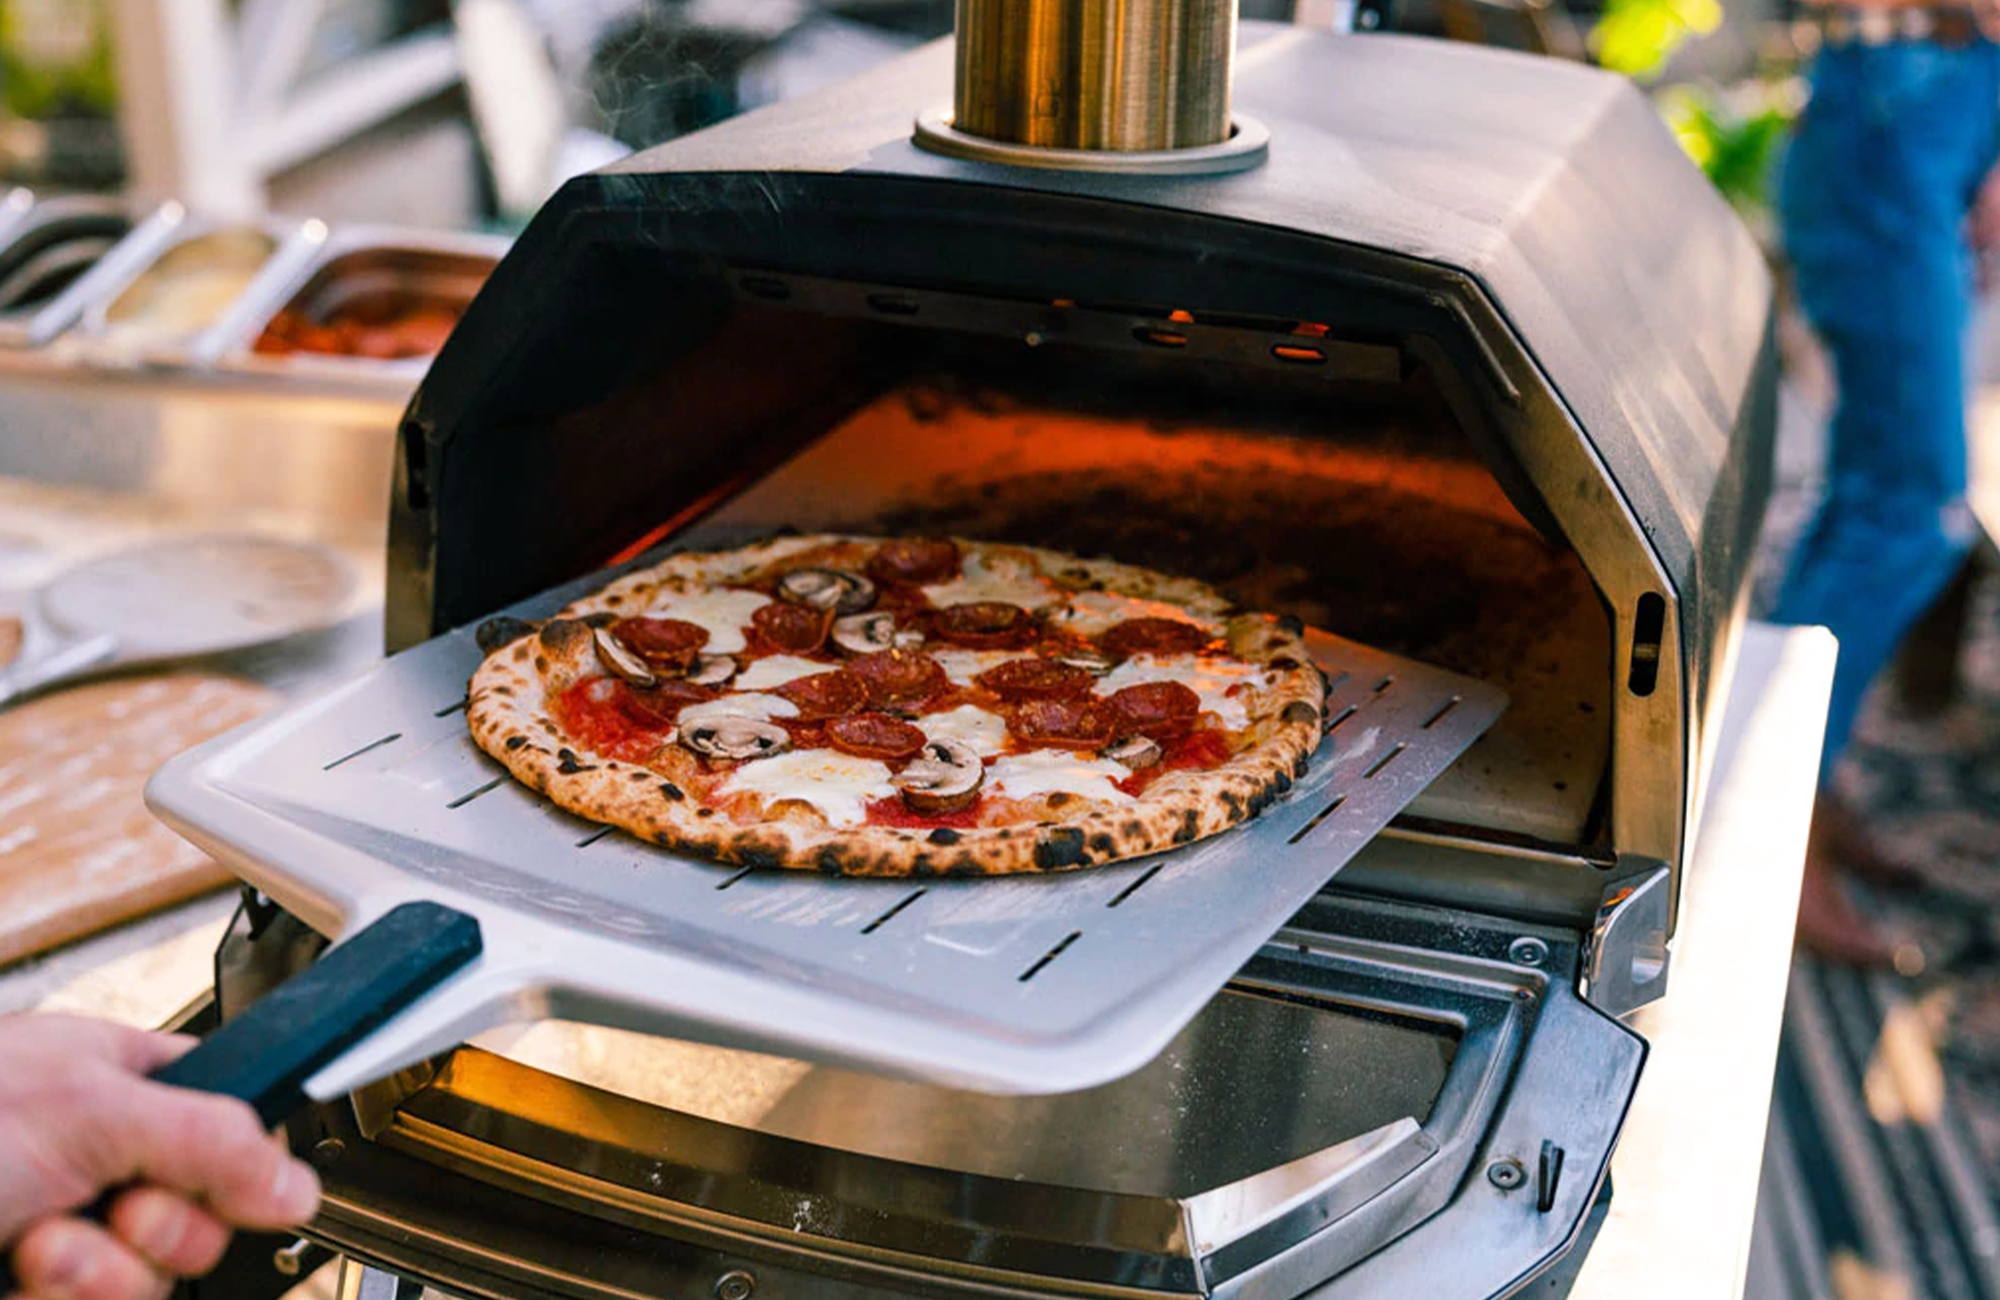 How do you prefer your pizza with a smoky fragrance or without?